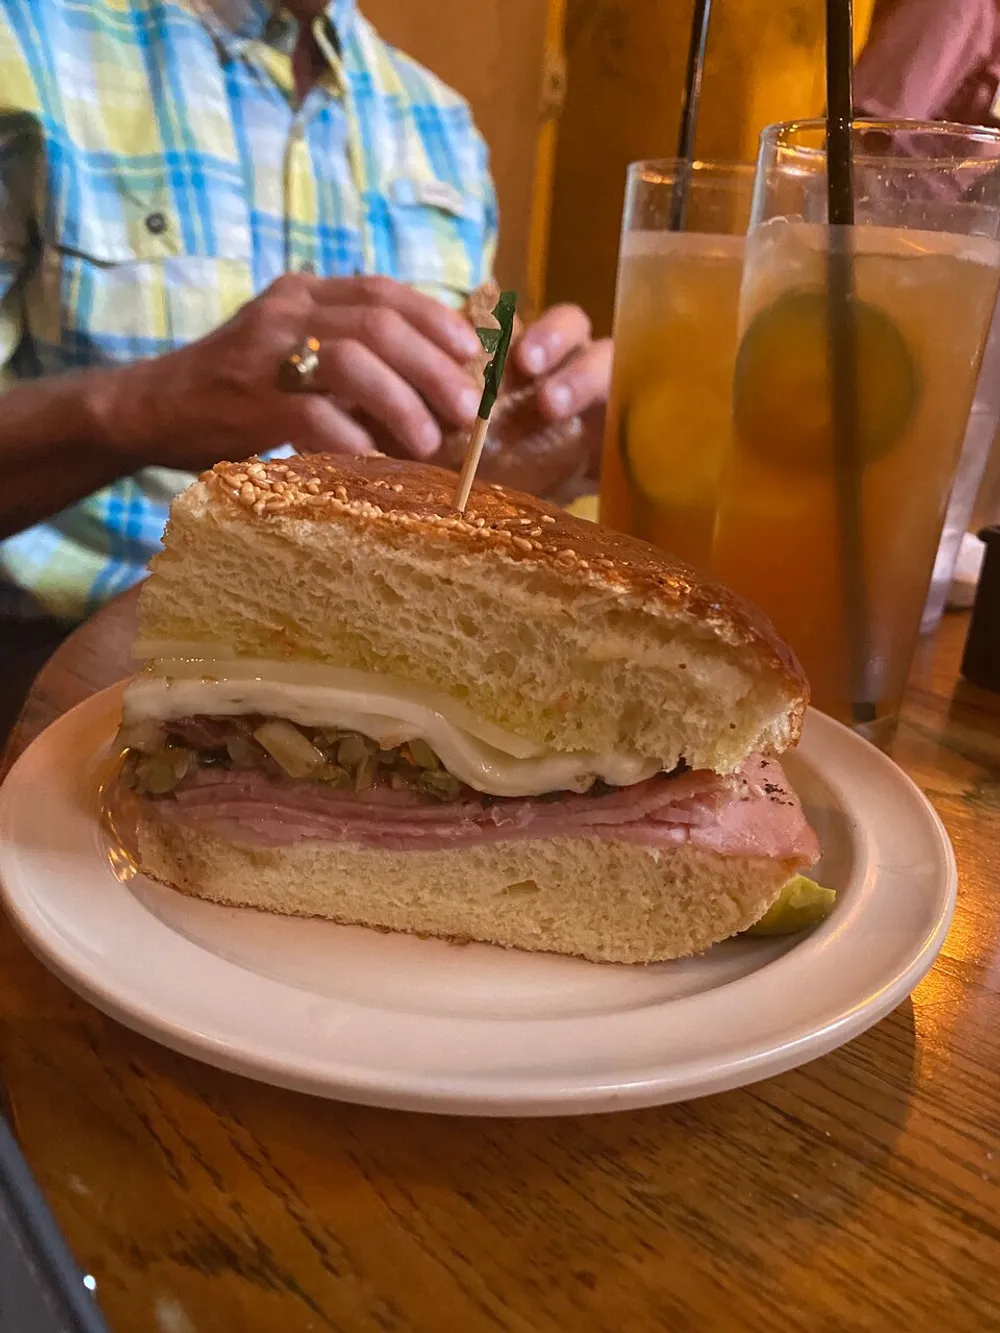 A half-eaten sandwich with ham cheese and pickles is on a plate in the foreground with a person and iced drinks in the background